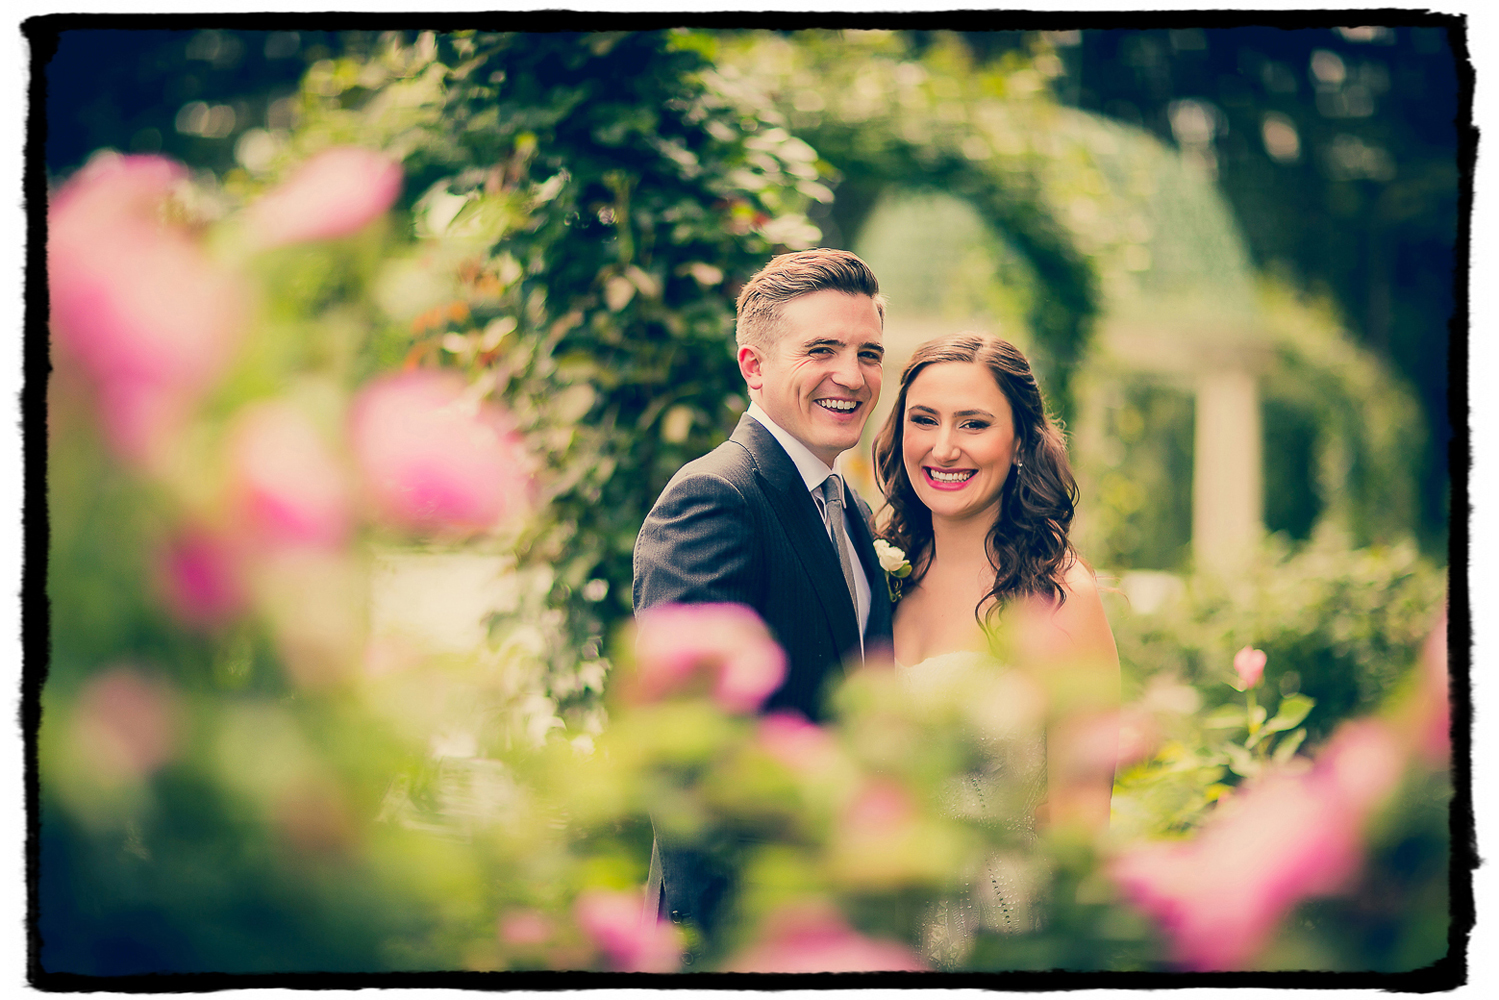 Michelle and Dan were radiant in the rose garden at their Lyndhurst Mansion wedding in Westchester NY.